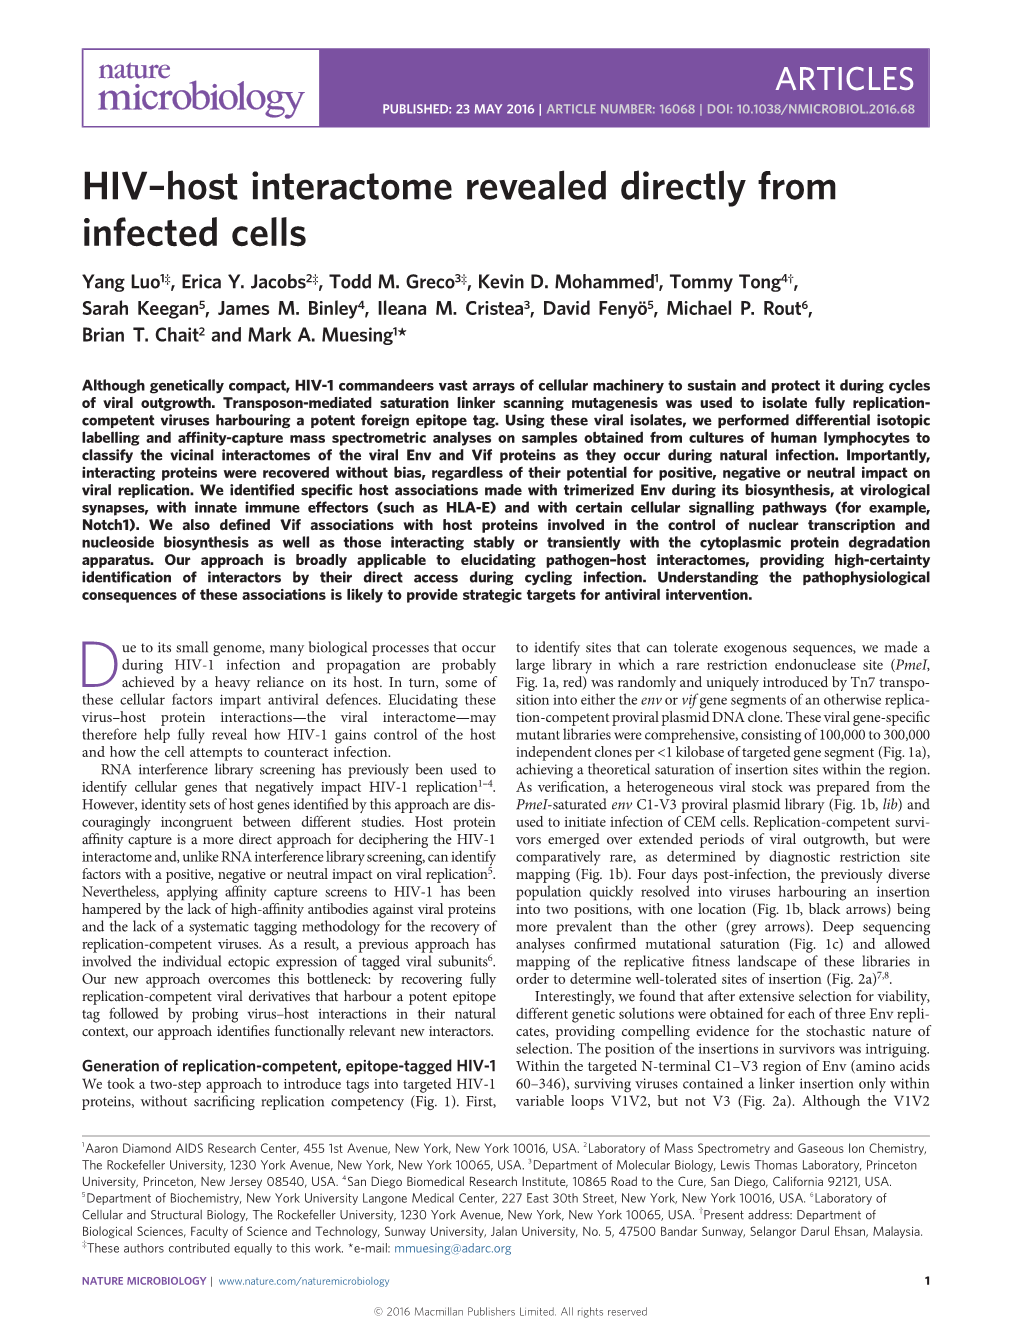 HIV-Host Interactome Revealed Directly from Infected Cells